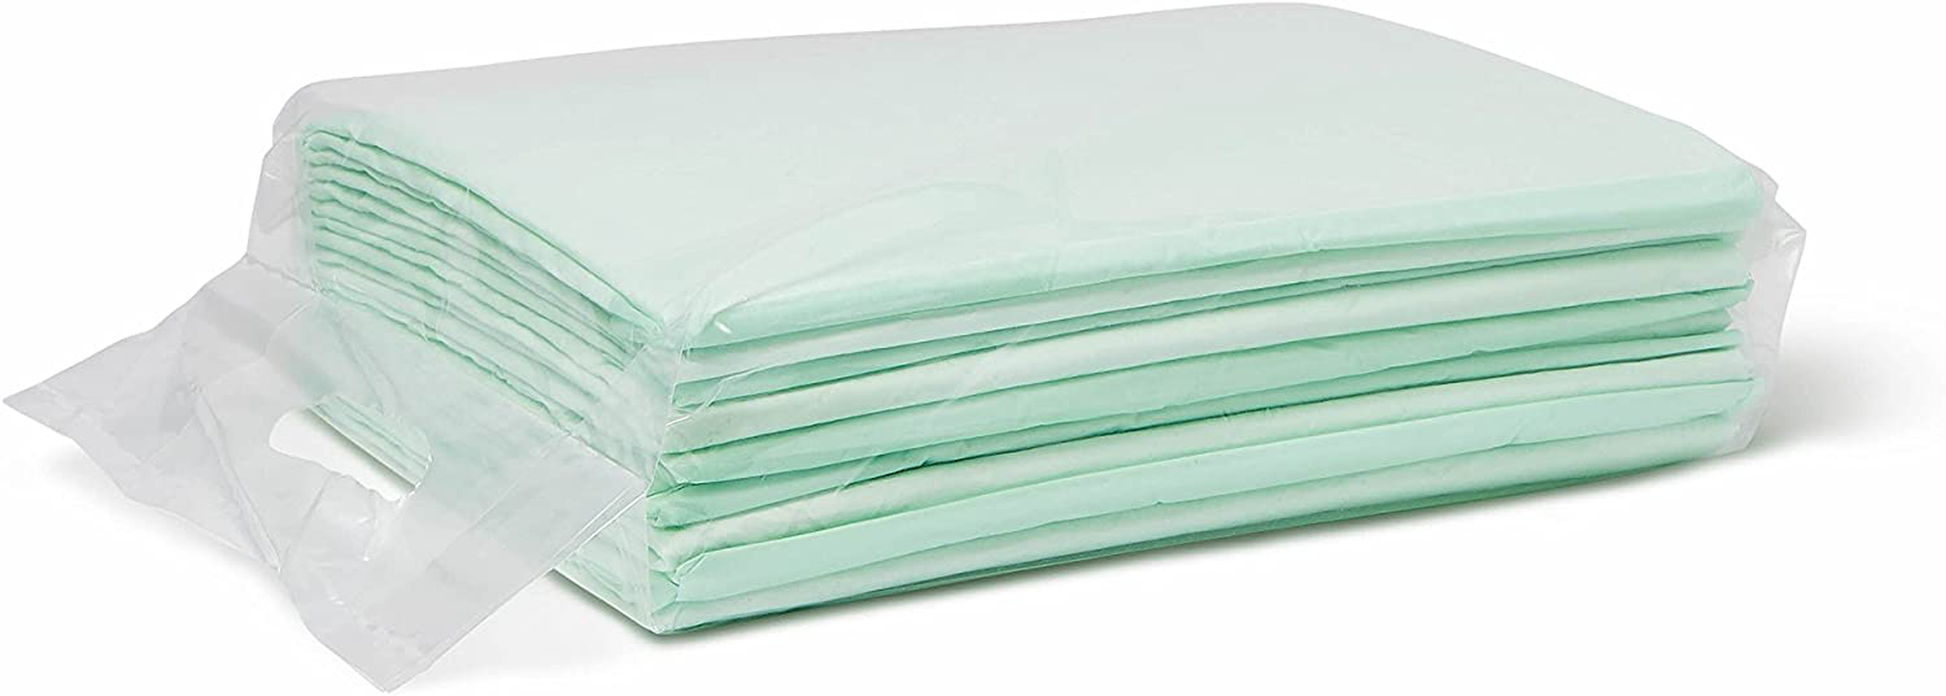 Medline Heavy Absorbency 36" X 36" Quilted Bed Pads, Large Disposable Underpads, 50 per Case, Fluff and Polymer Core, Great Protection for Beds, Furniture, Surfaces Animals & Pet Supplies > Pet Supplies > Dog Supplies > Dog Diaper Pads & Liners Medline   